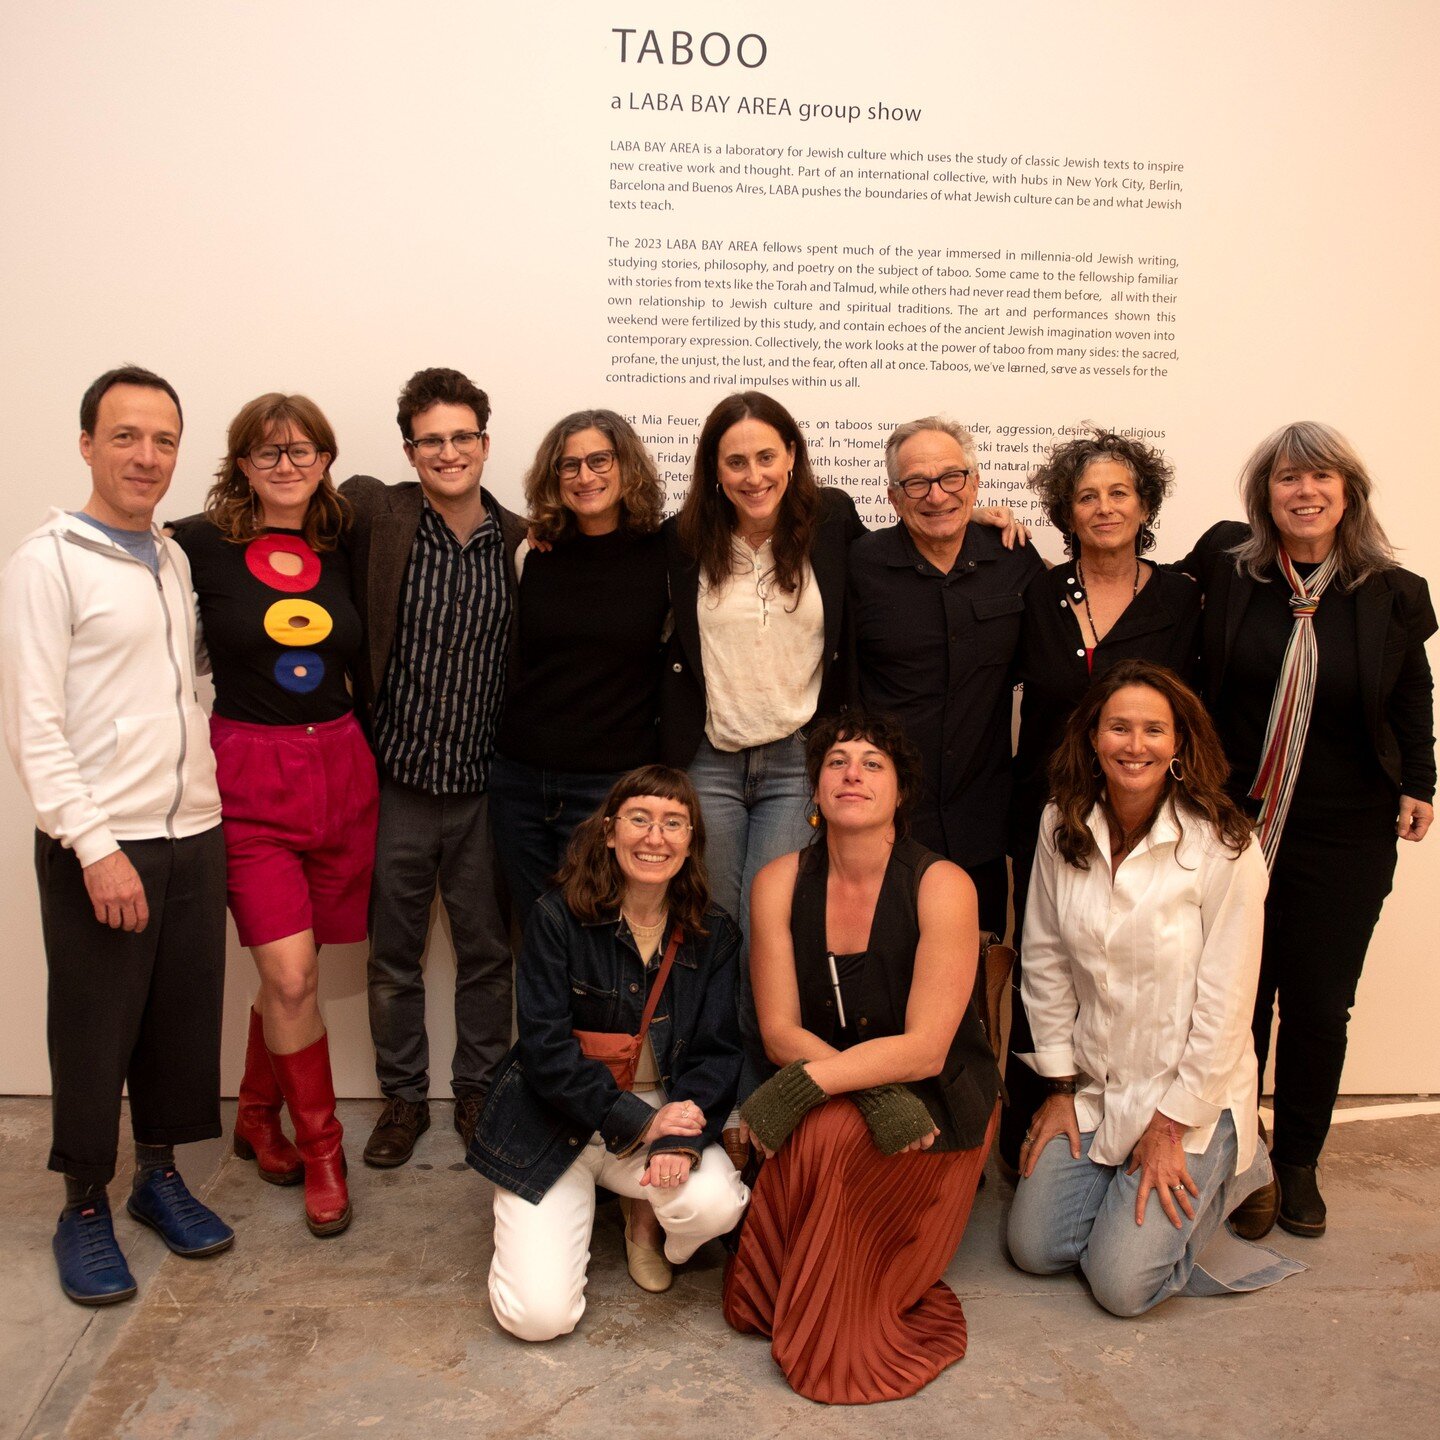 This is the first of two posts featuring photos from the LABA BAY AREA TABOO show, a sold-out powerhouse of a weekend filled with art, performance, connection and conversation. Enjoy!

@feuermia @amyclairet @altars__everywhere @peterlstein @flyawaypr